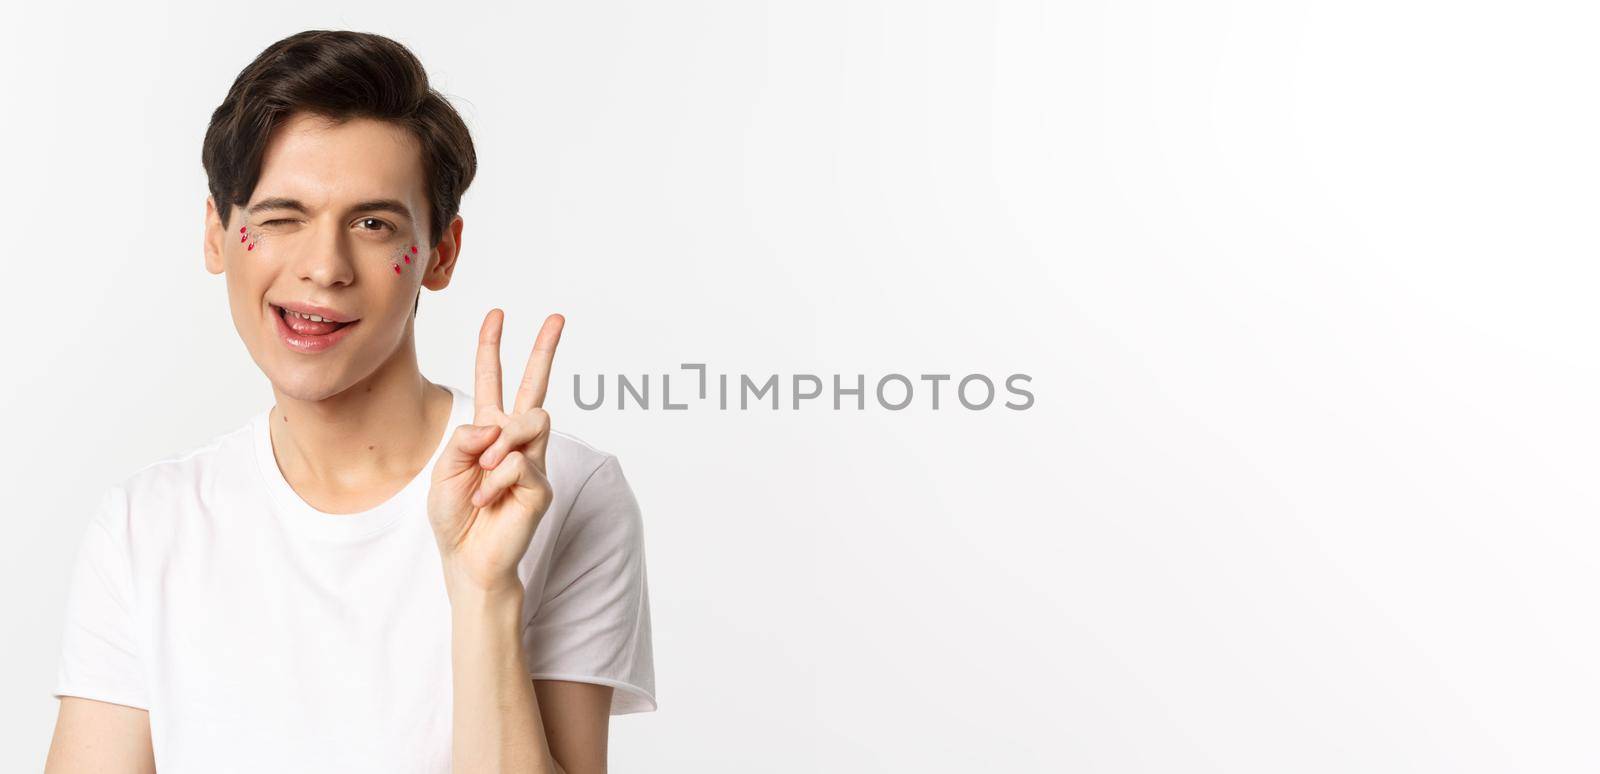 People, lgbtq community and lifestyle concept. Happy and cute gay man with glitter on face, showing peace sign and smiling, celebrating pride holiday, white background.